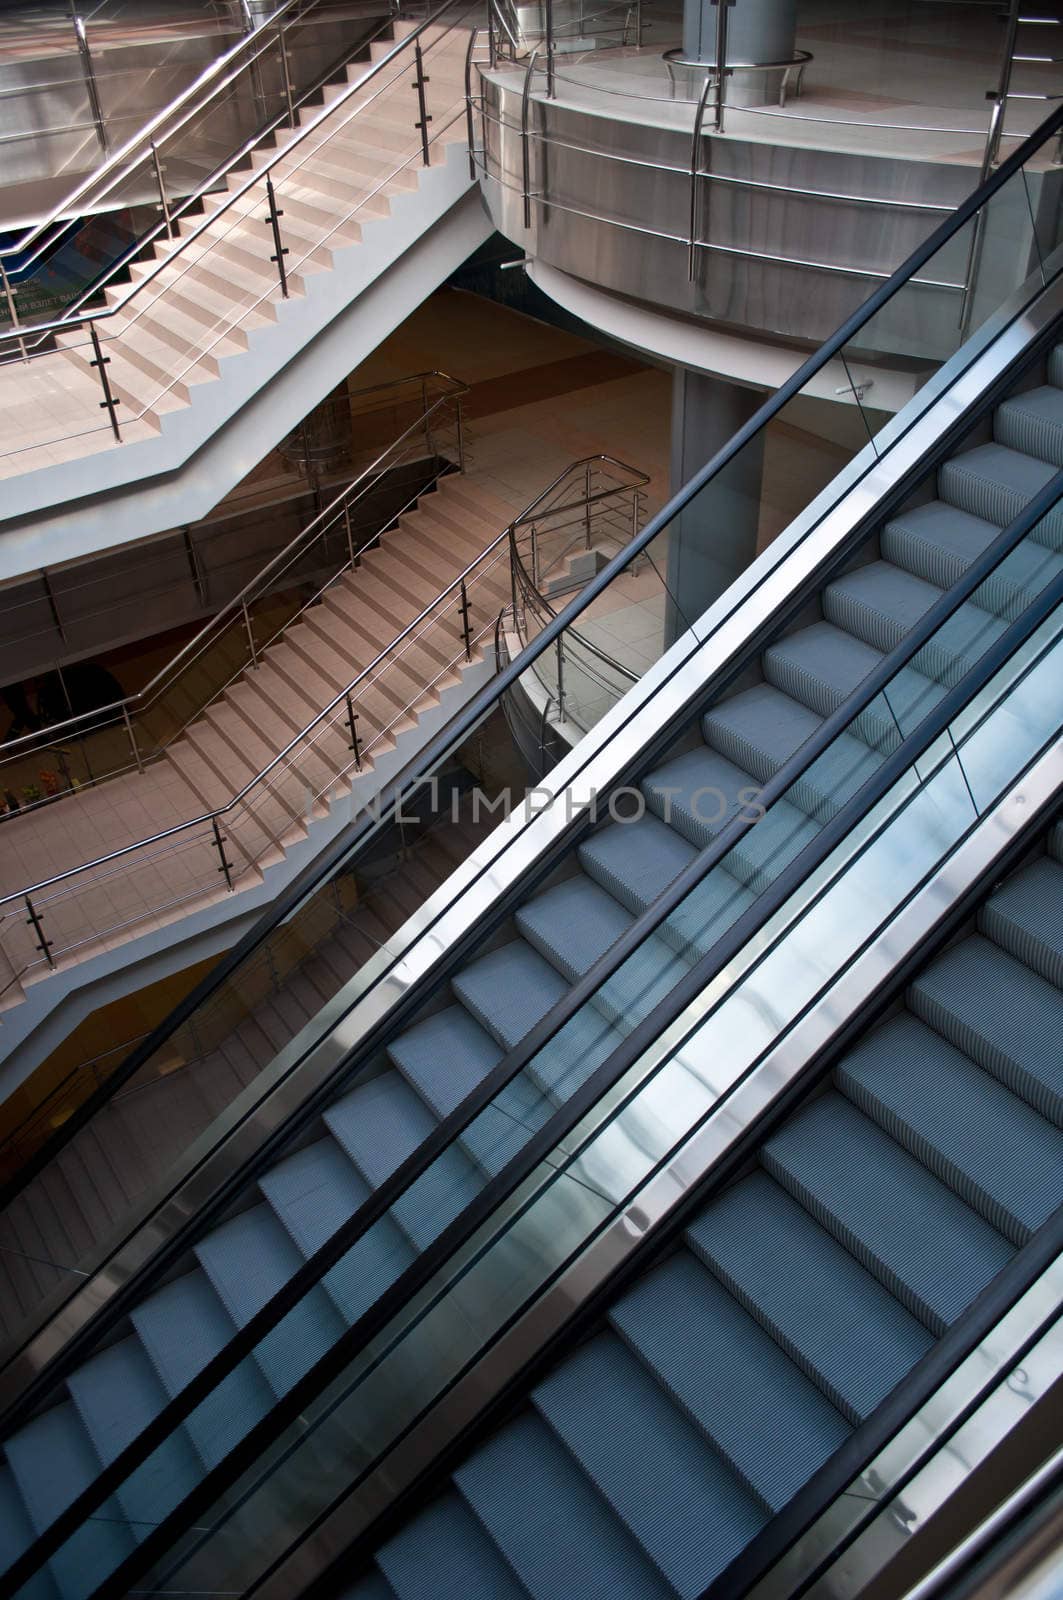 escalators and stairs in a modern office building